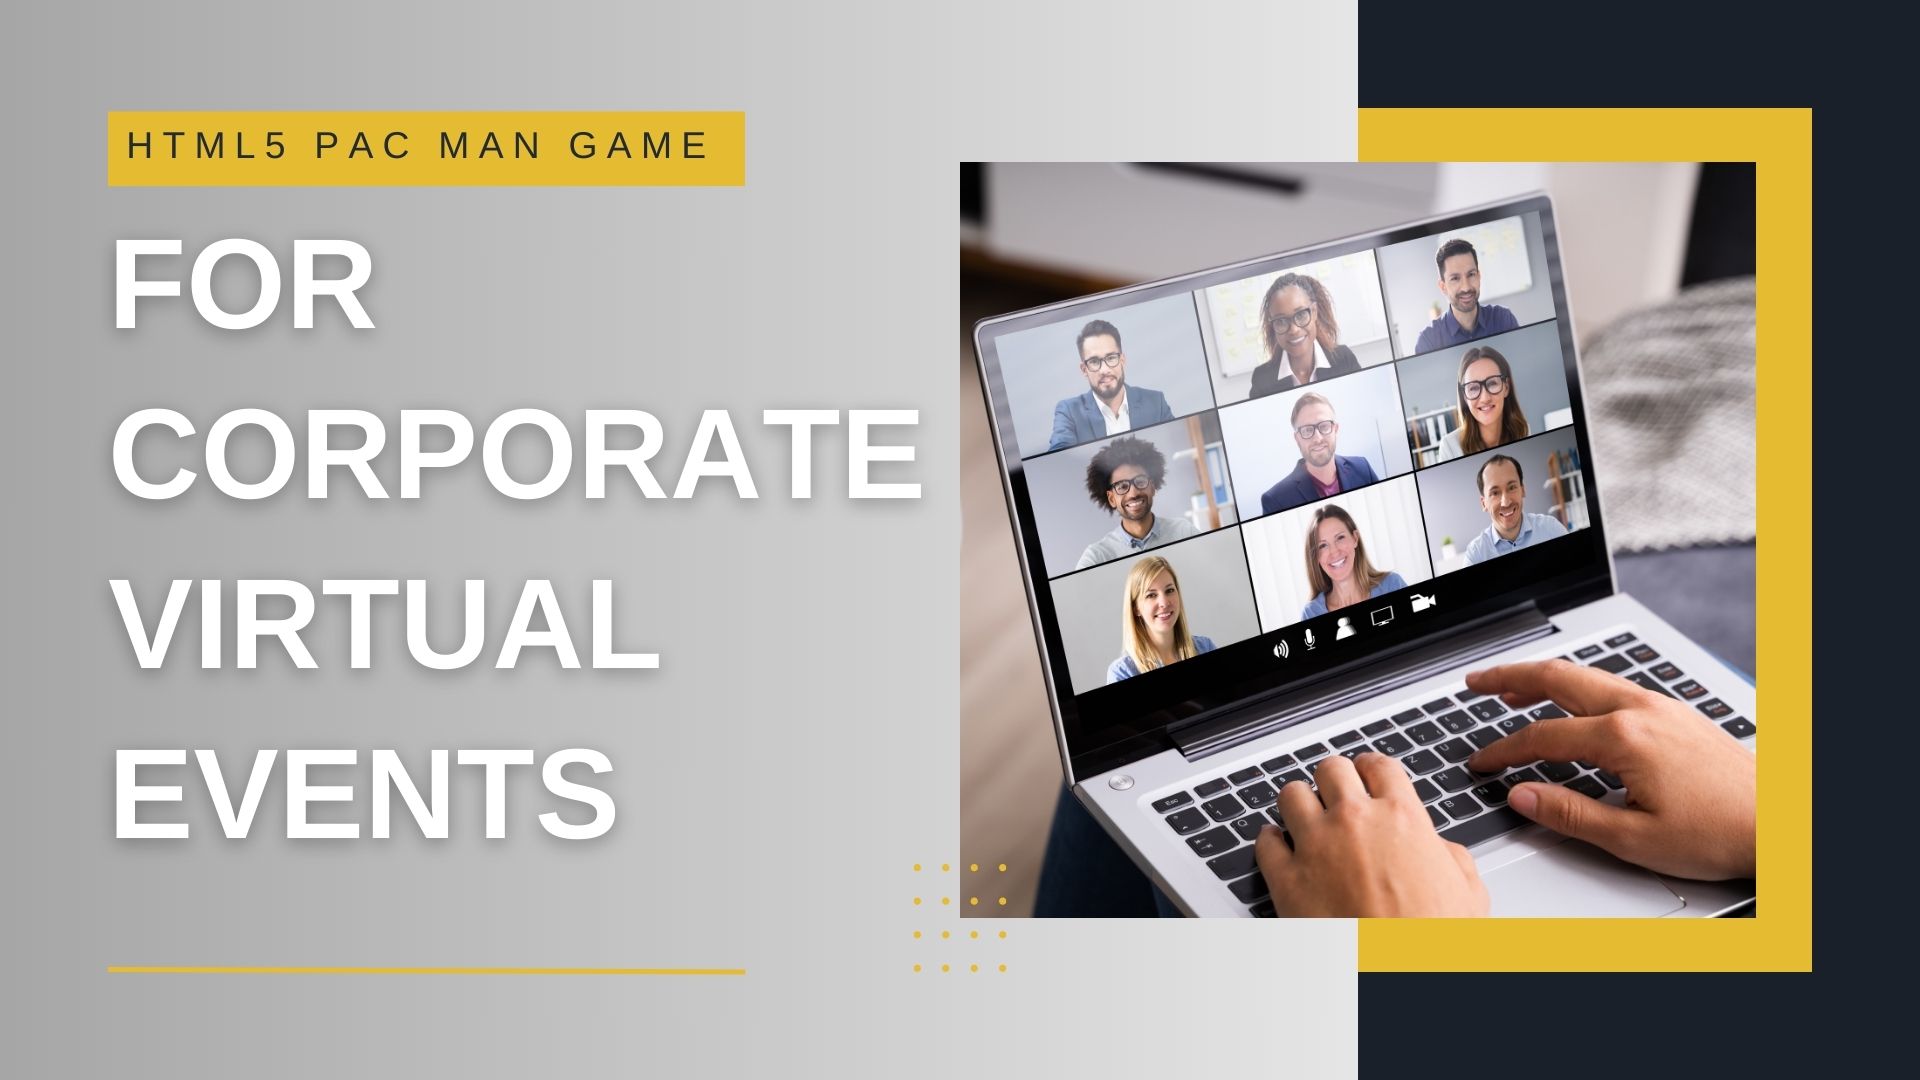 HTML5 Pac Man Game For Corporate Virtual Events